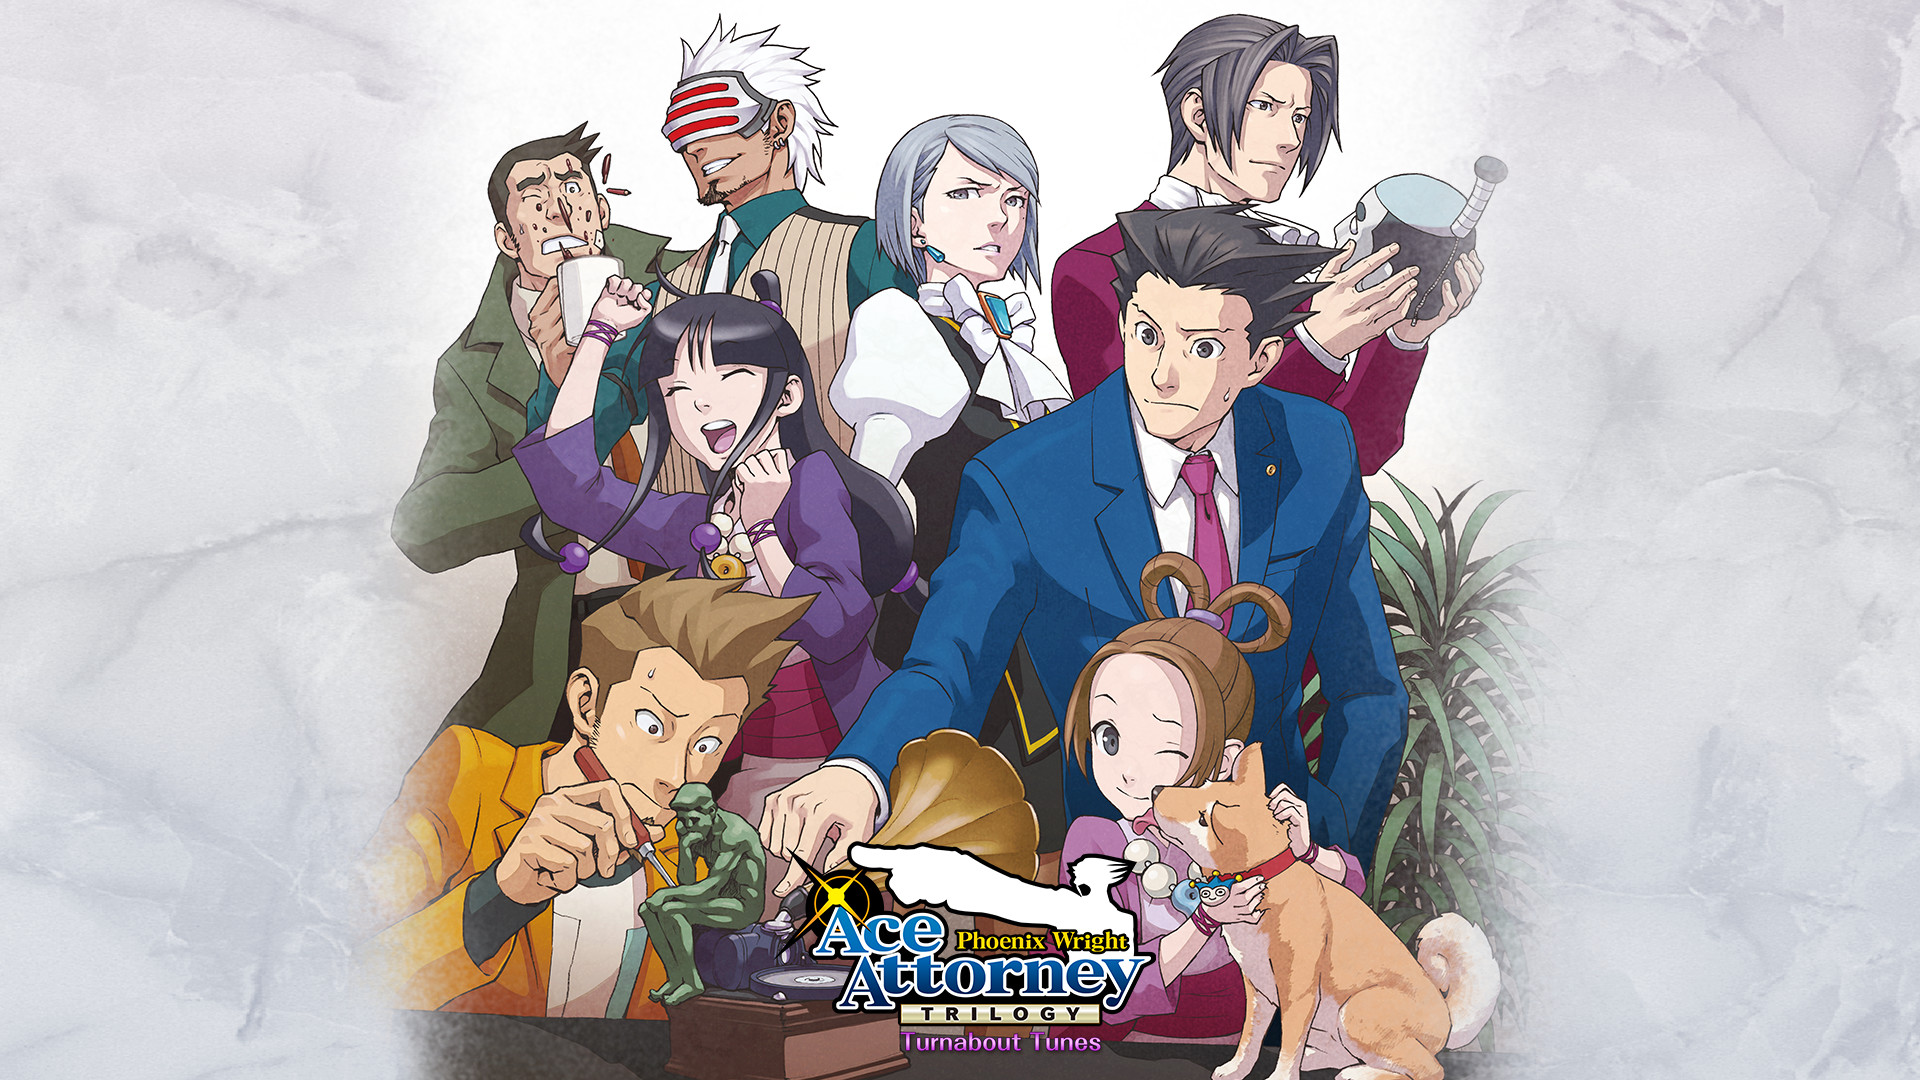 Phoenix Wright: Ace Attorney Trilogy - Turnabout Tunes Featured Screenshot #1